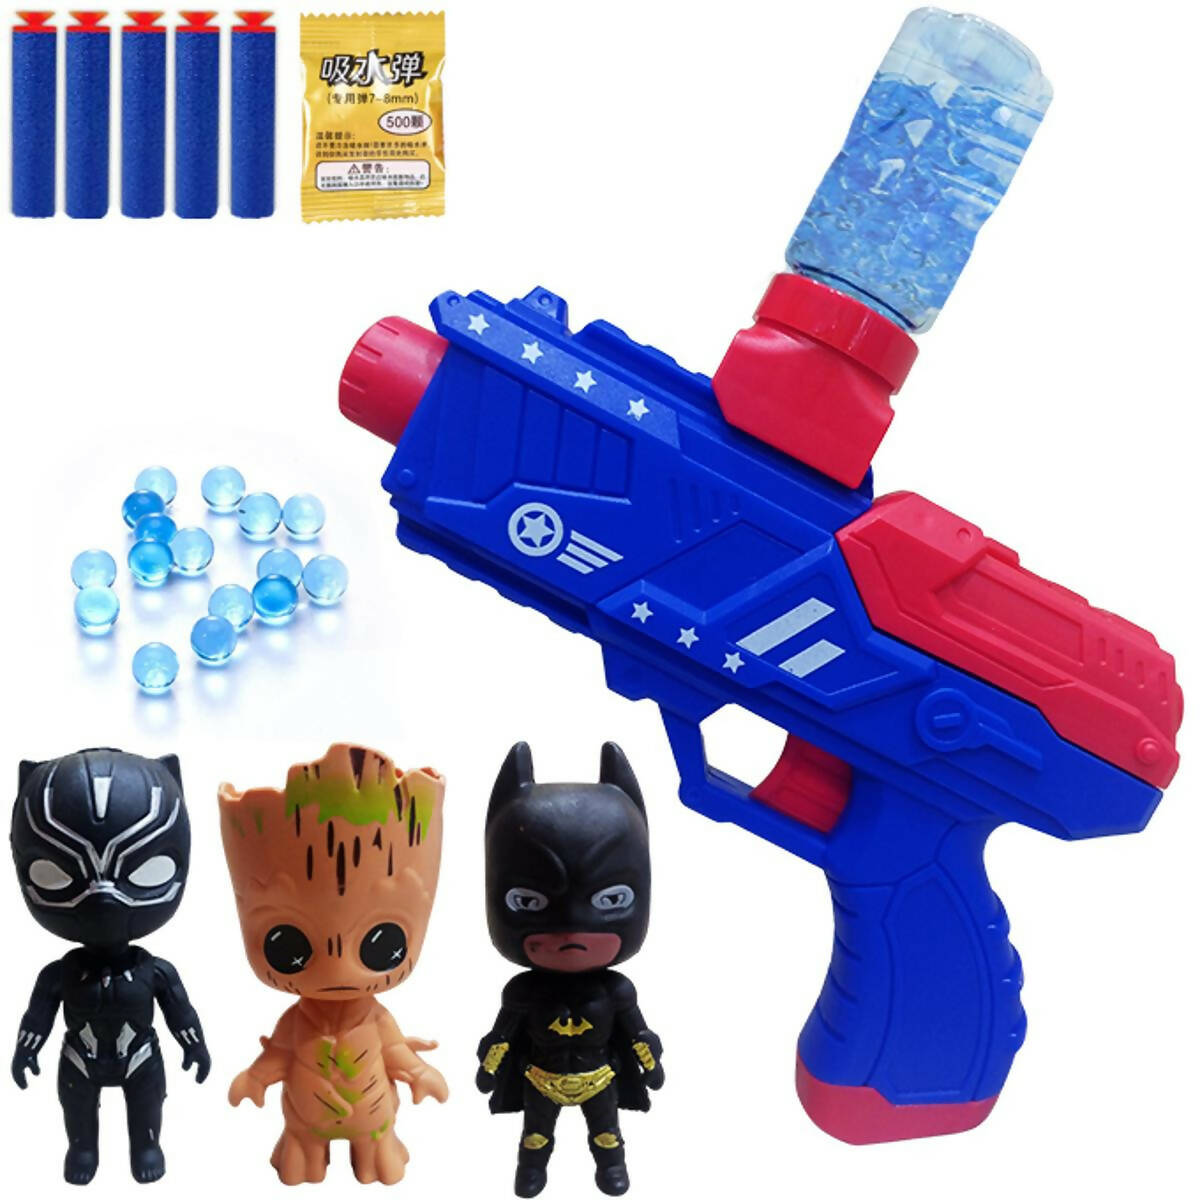 2 in 1 Captain America Manual Reload Gel Blaster and Darts Toygun WIth 3 Mini Action Figures